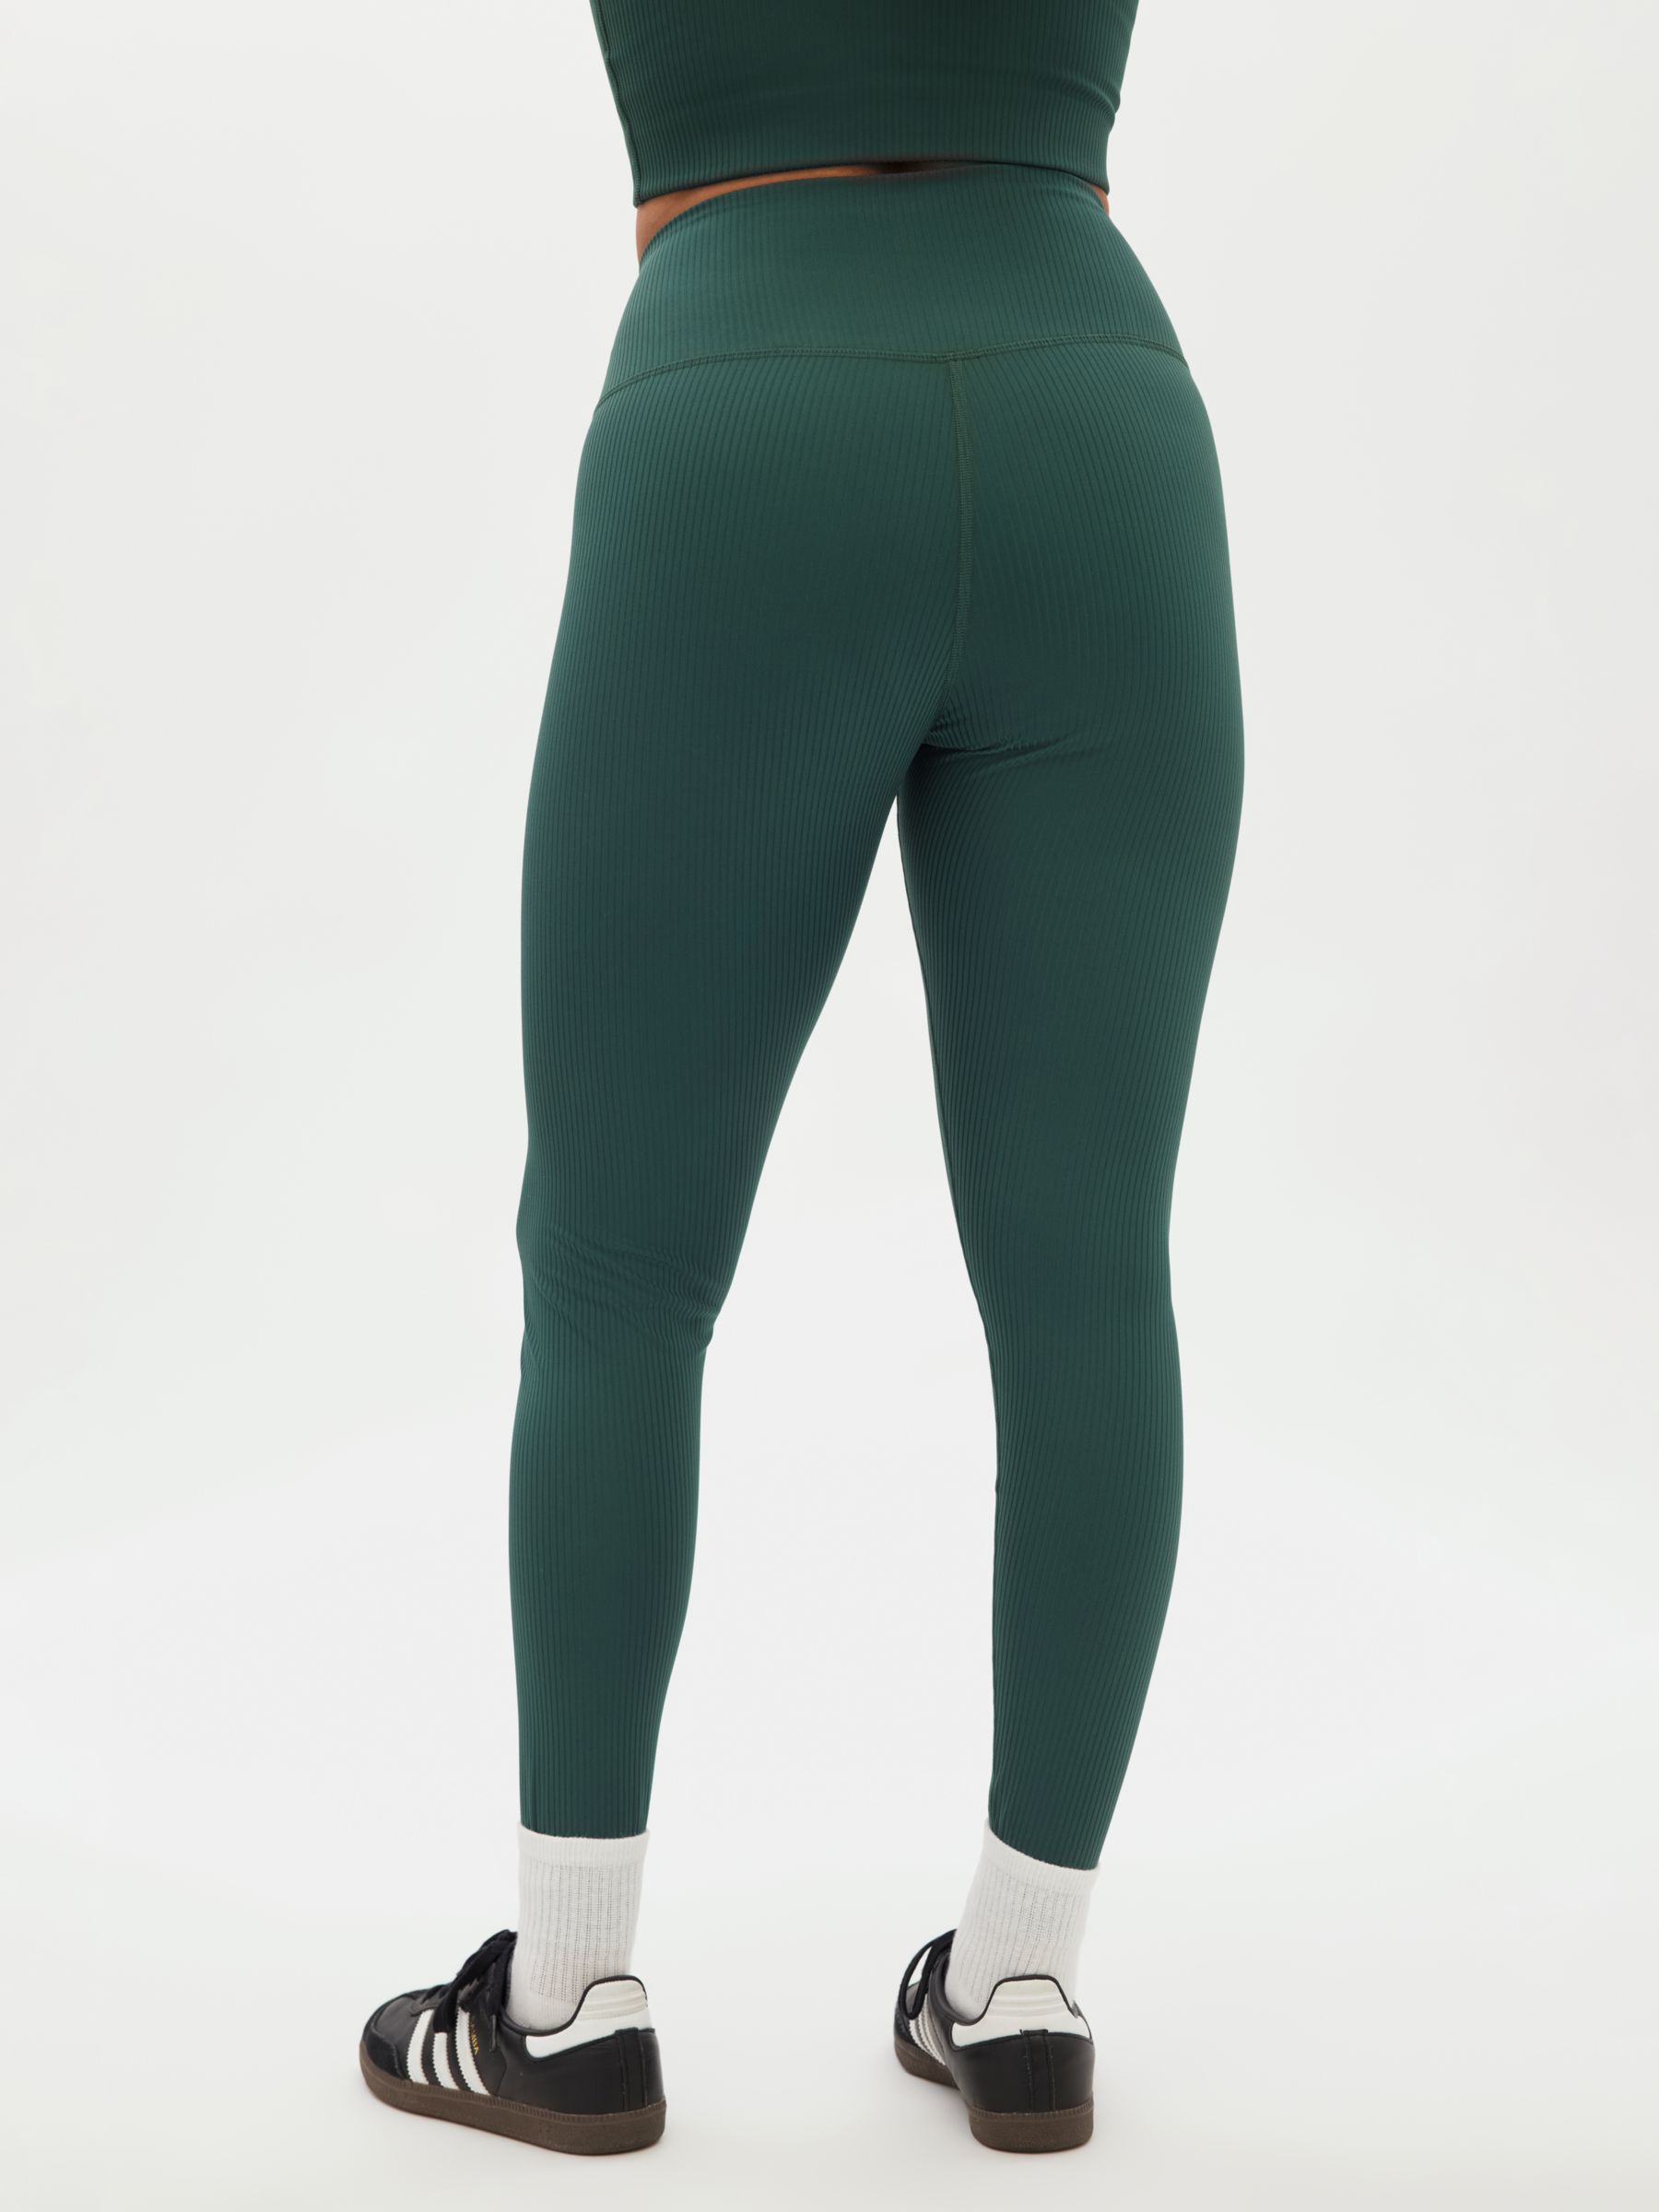 Buy Girlfriend Collective Rib High Rise 7/8 Leggings, Moss Online at johnlewis.com